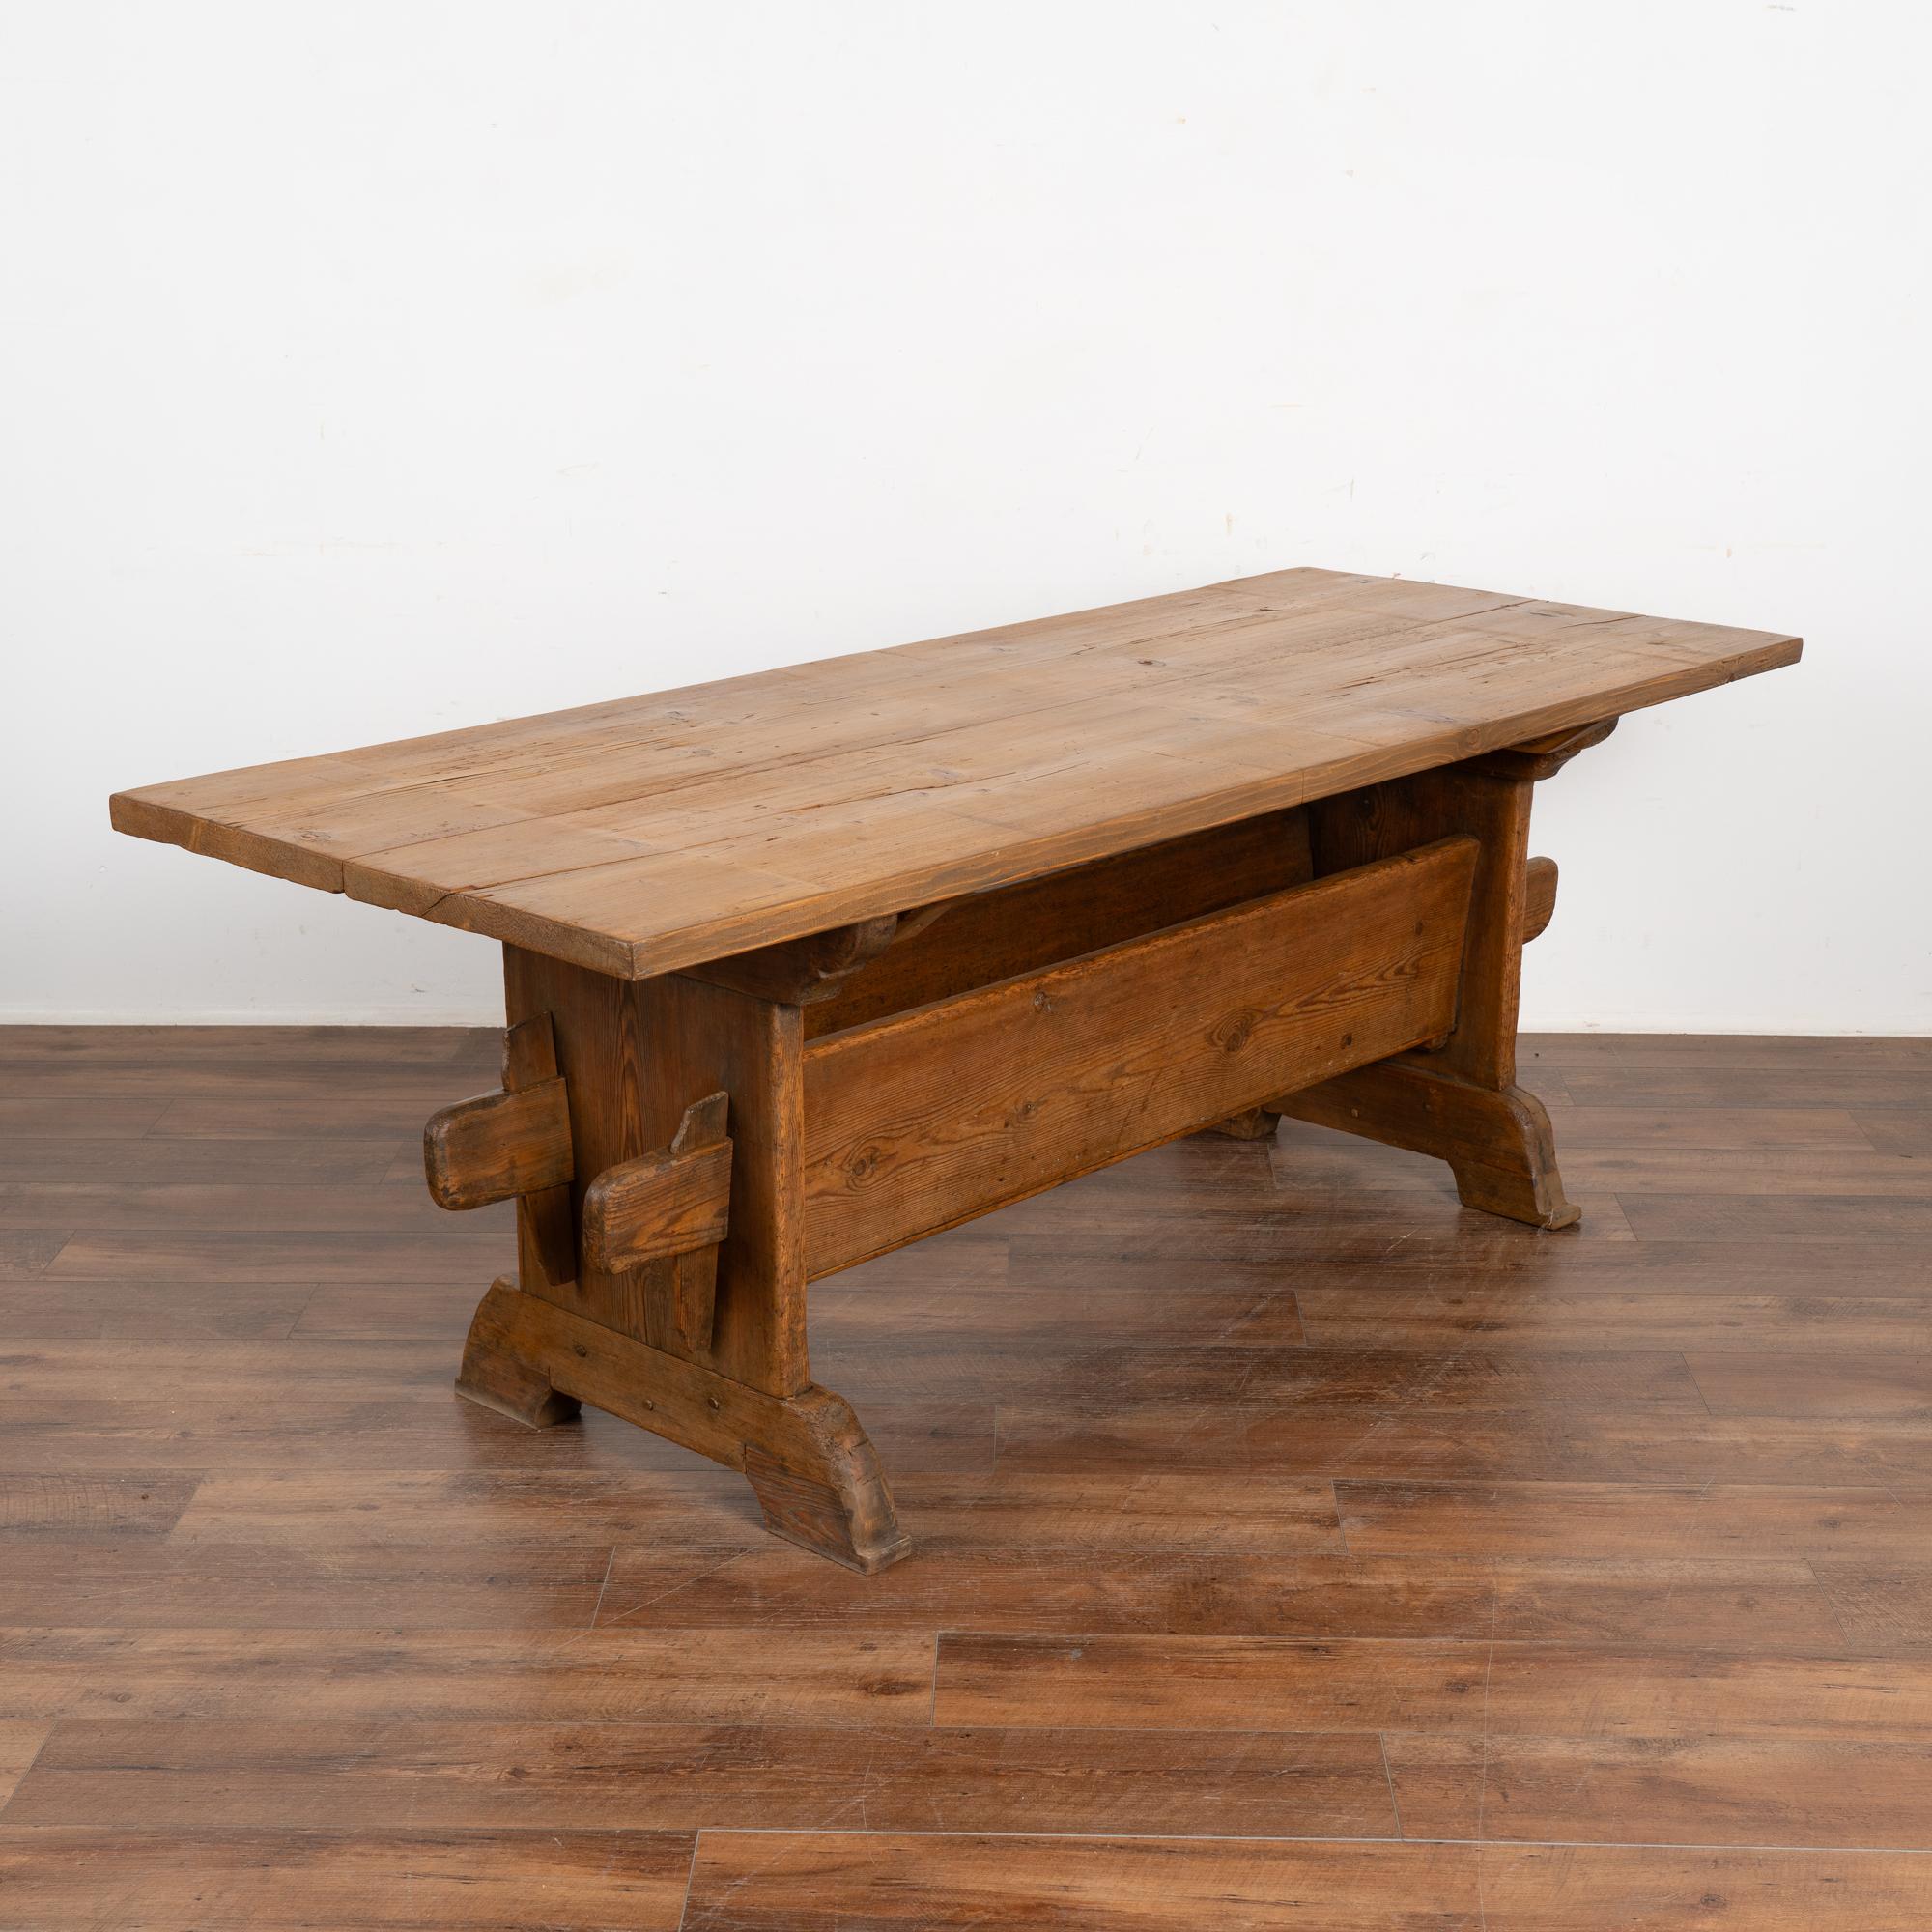 This old Swedish farm table is loaded with character due to the deep aged patina in the warm pine that come from generations of use.  
Unique to this table are the wide stretchers/runners which are 11